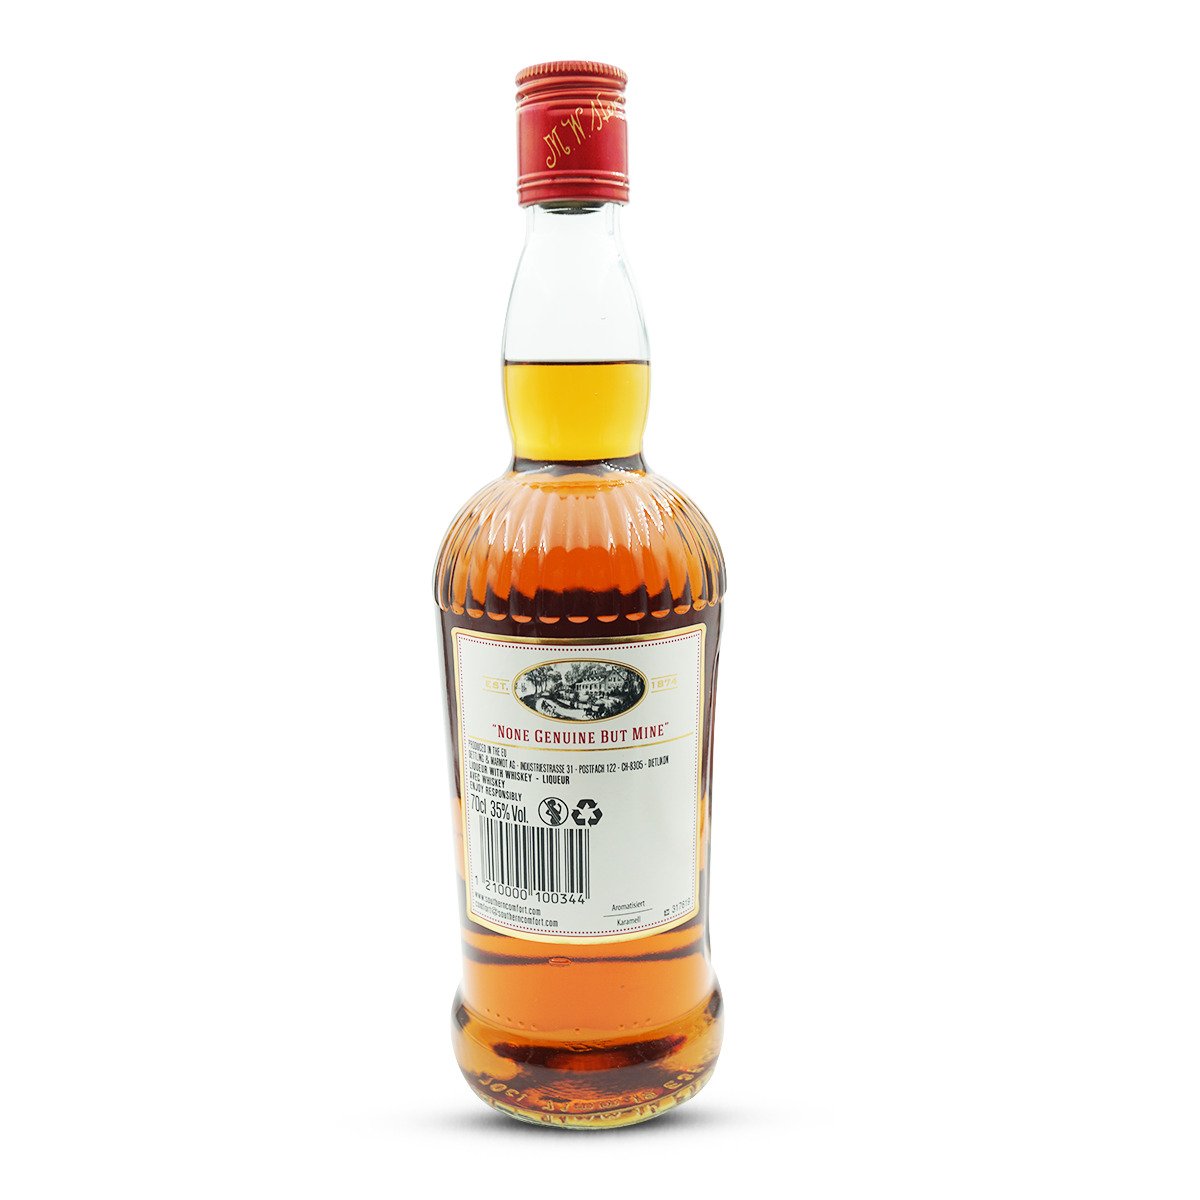 Southern Comfort Whisky Liqueur